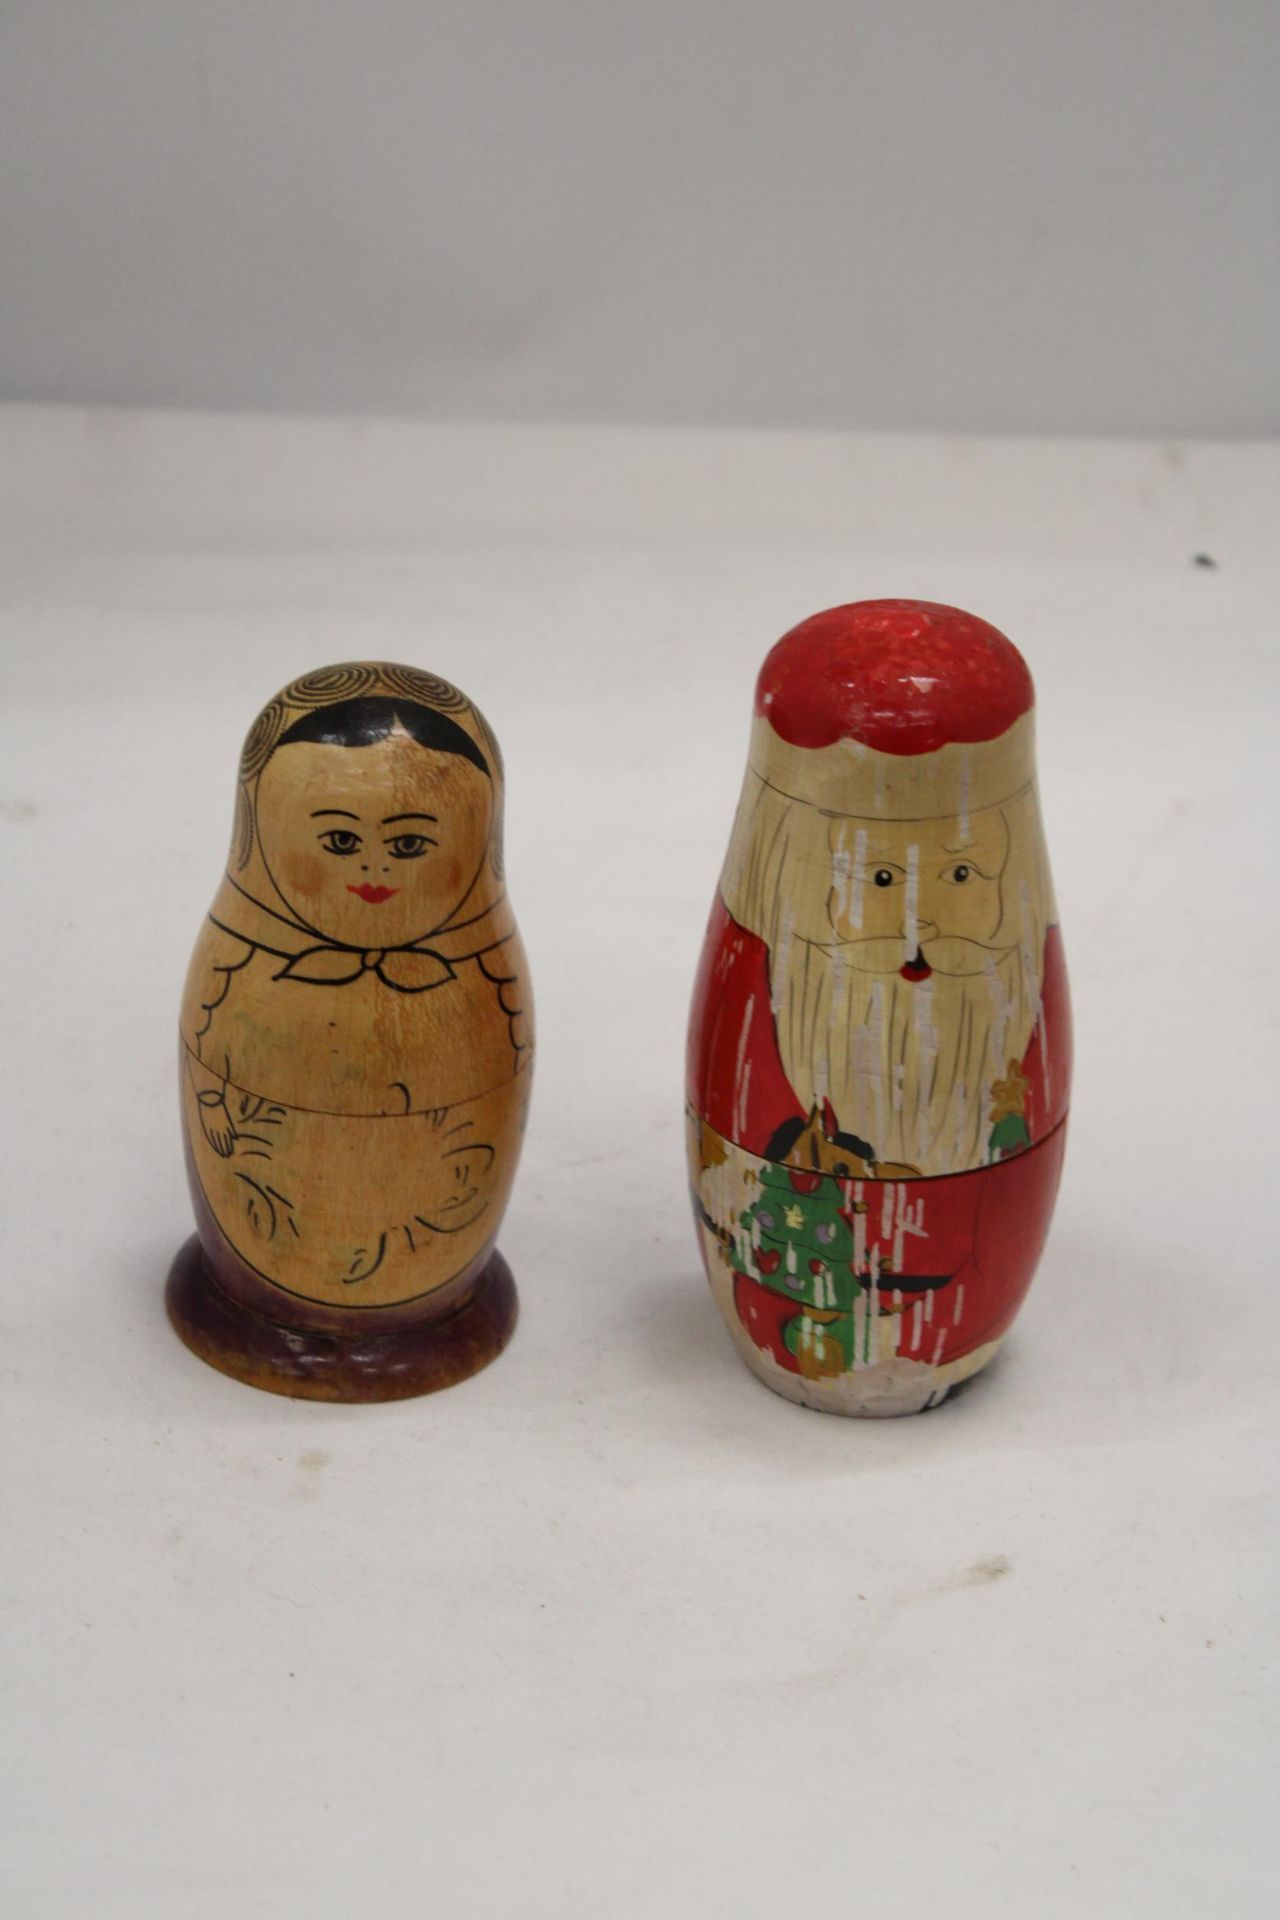 A RUSSIAN NESTING DOLL AND FATHER CHRISTMAS